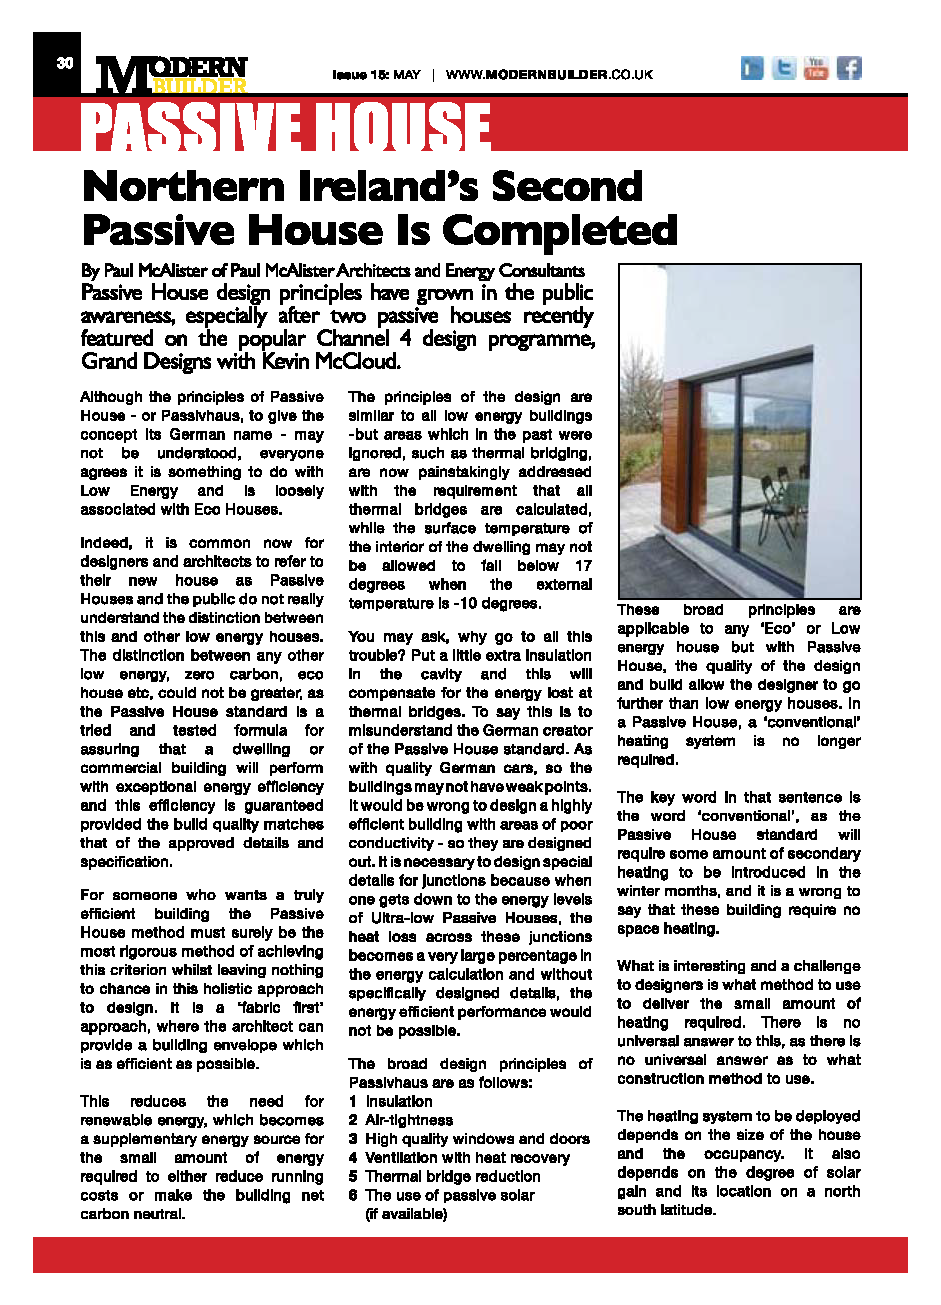 Modern Builder - May 2013_Page_2.png